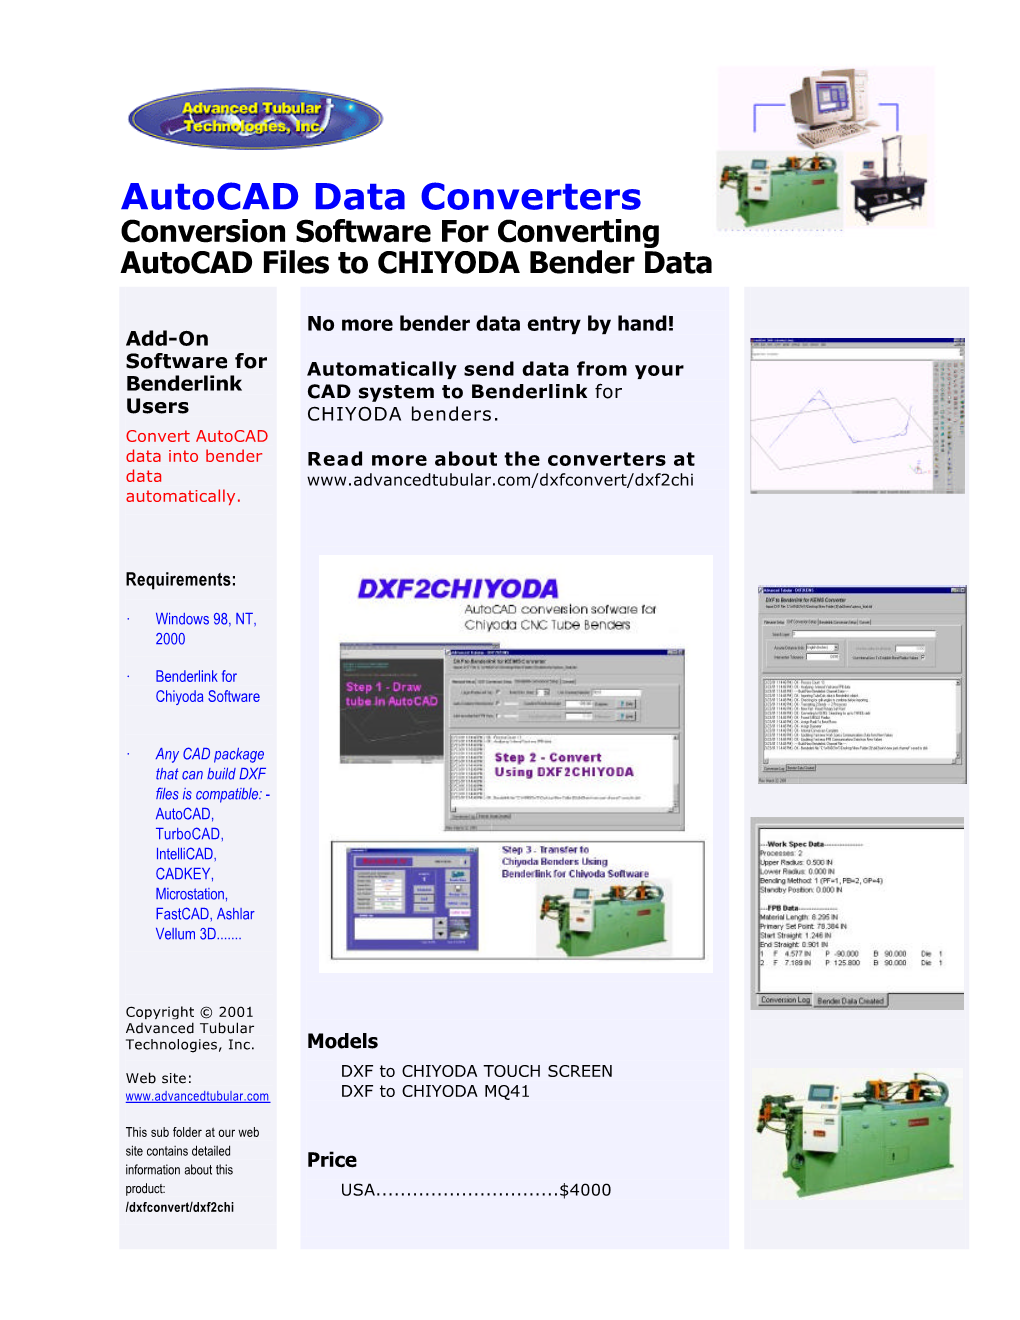 Autocad Data Converters Conversion Software for Converting Autocad Files to CHIYODA Bender Data